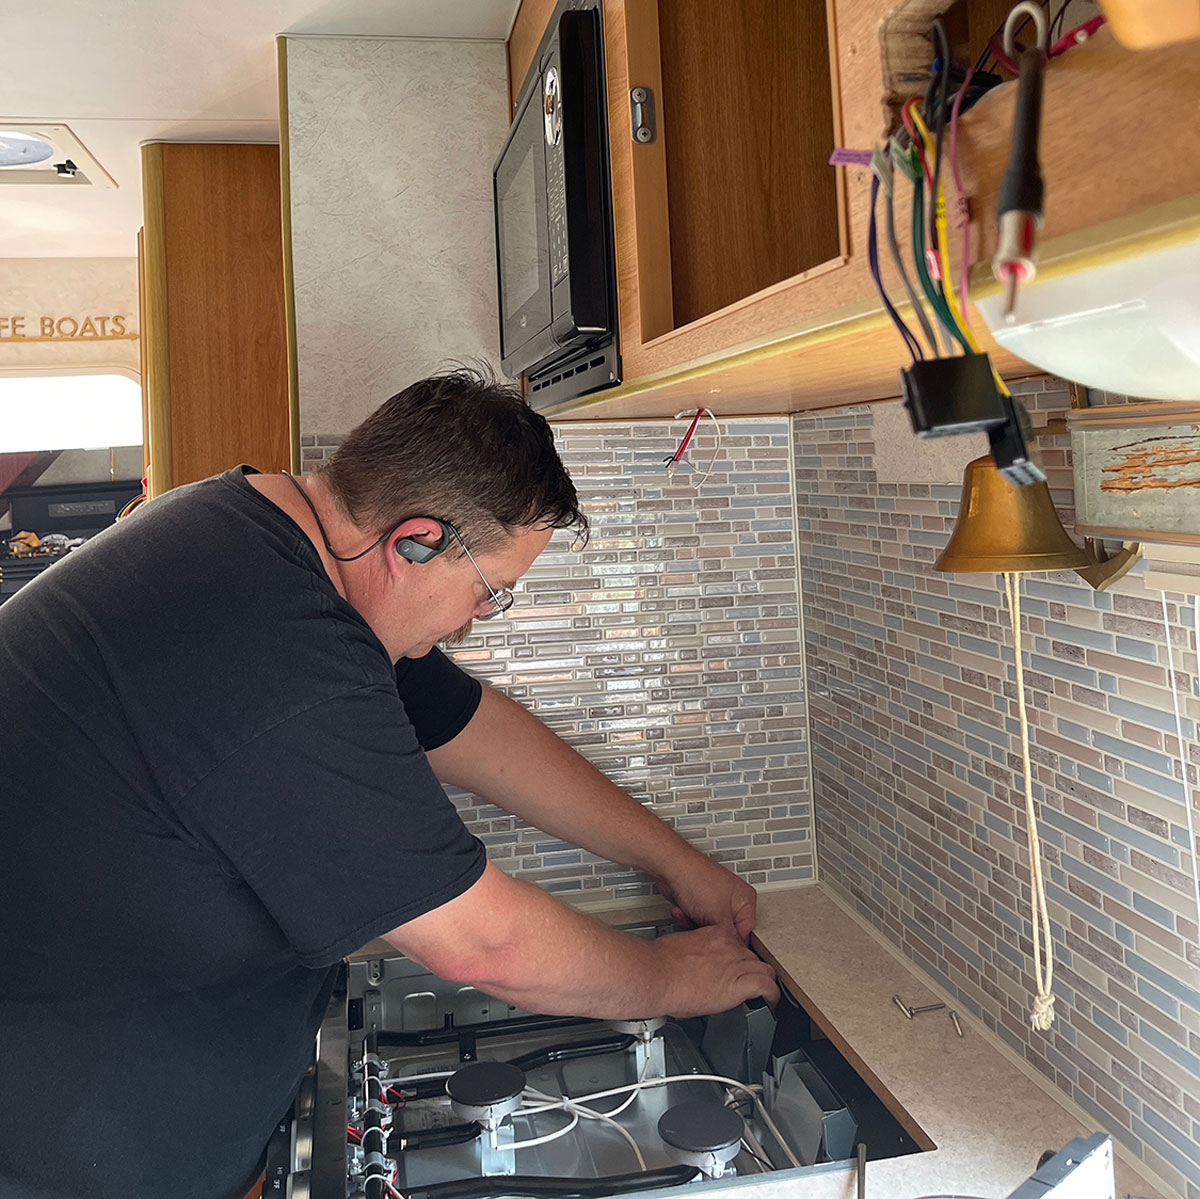 Contemporary Cooking: Replacing the RV appliances can bring new life and efficiency to your RV galley